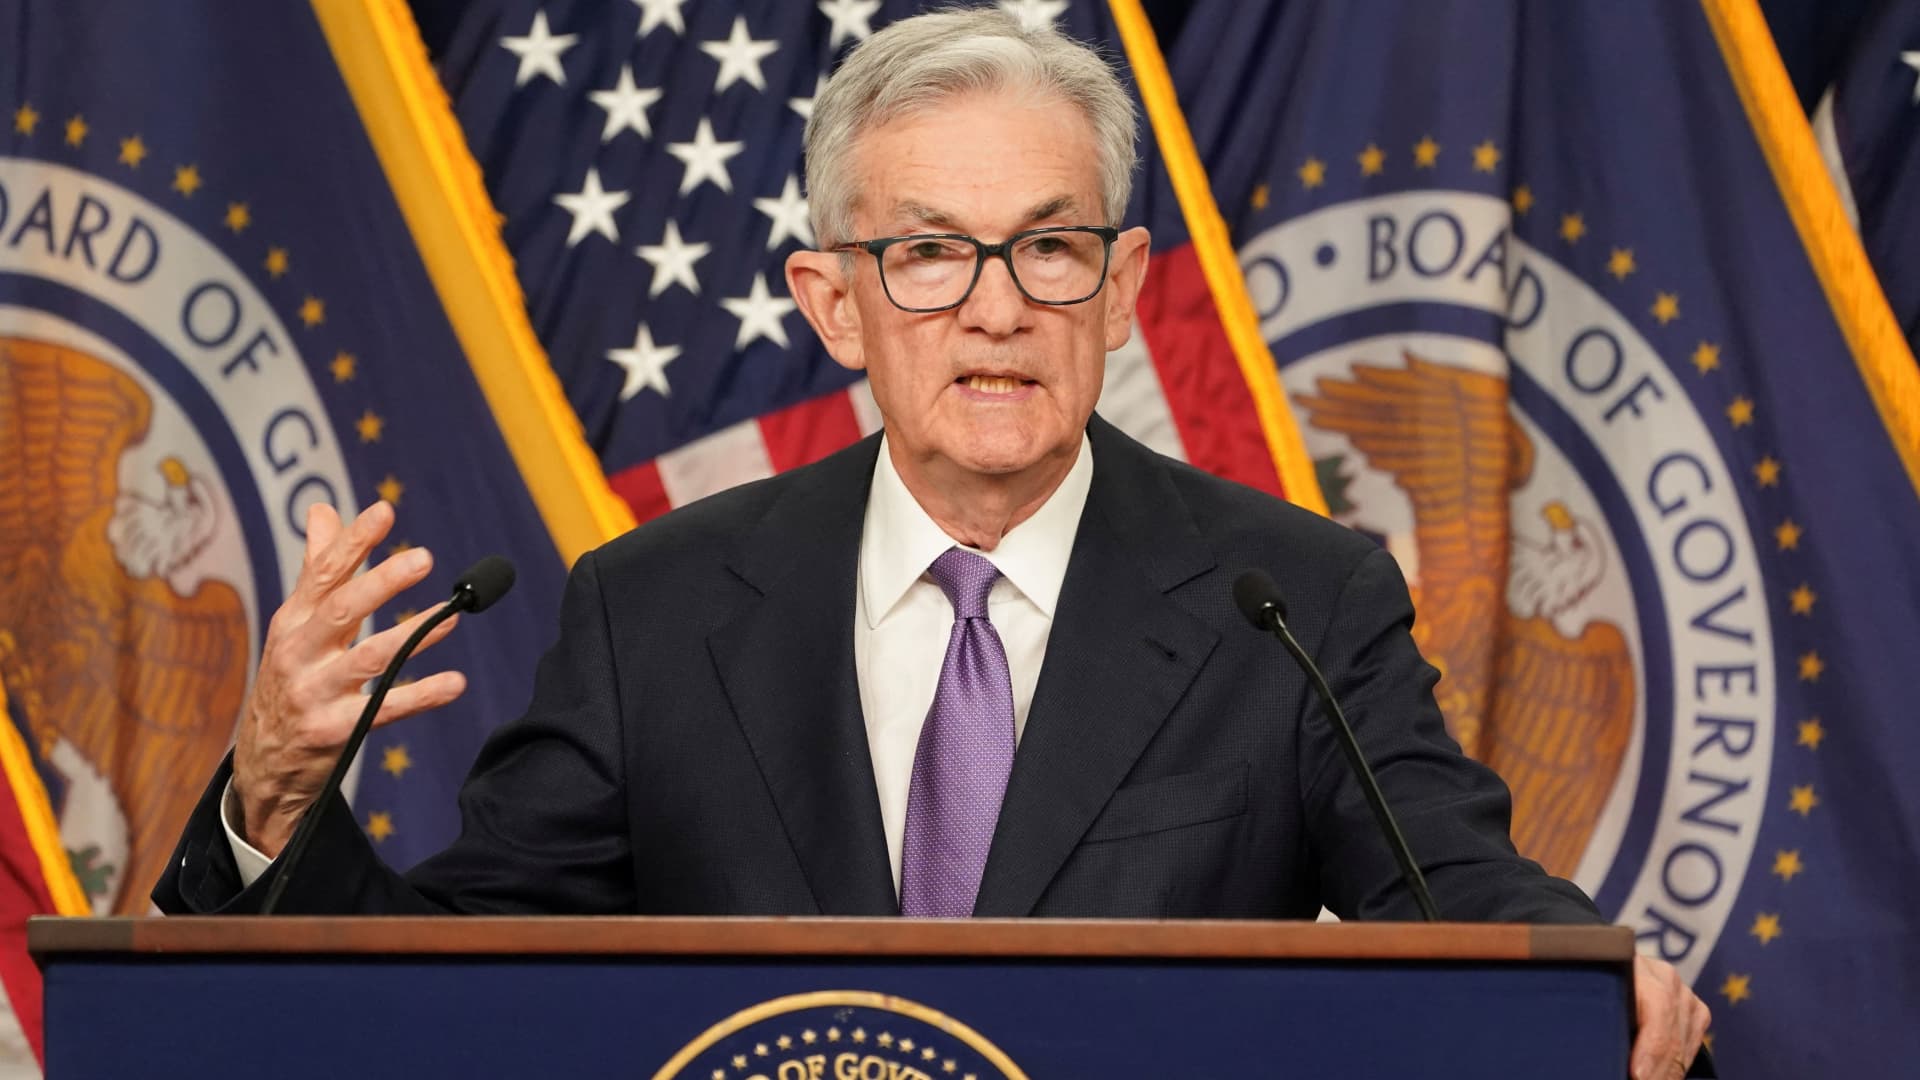 Fed Chairman Powell says there has been a "lack of further progress" on inflation this year